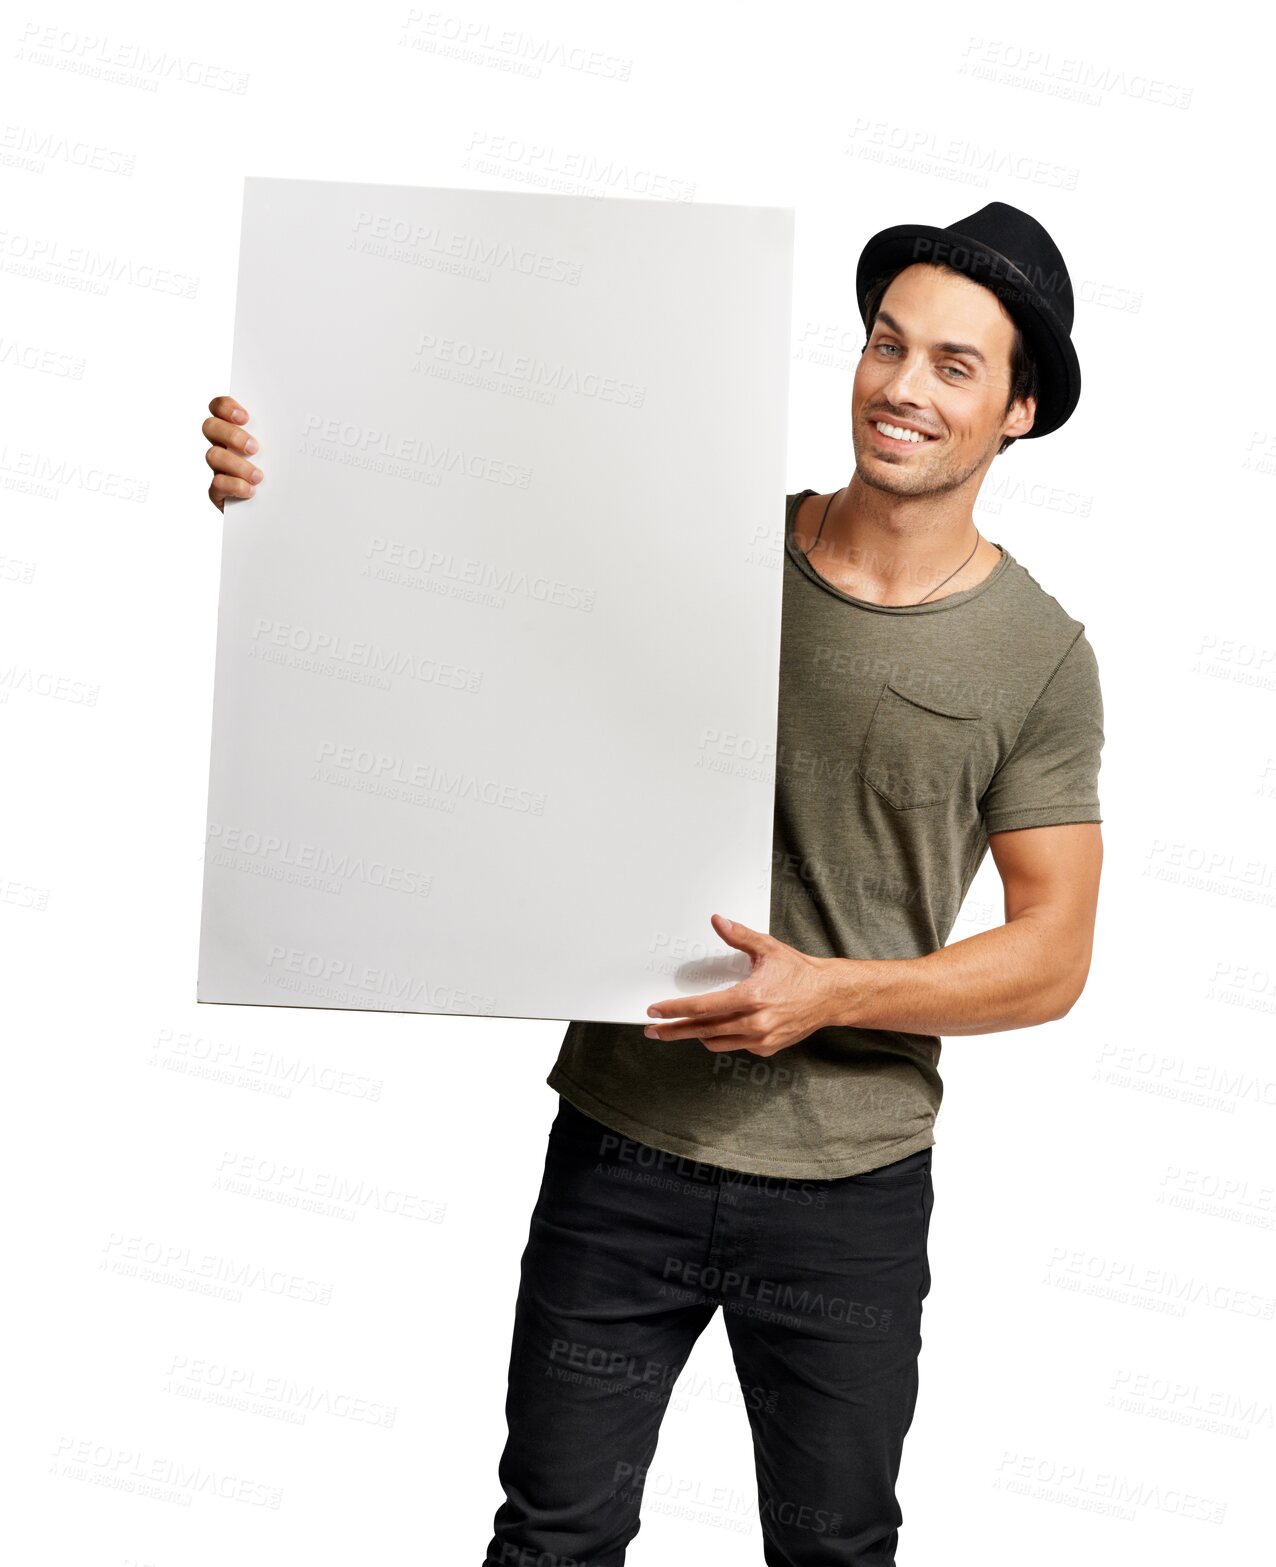 Buy stock photo Happy man, portrait and standing with billboard for advertising isolated on a transparent PNG background. Male person or young model in casual clothing with poster, sign or placard for advertisement